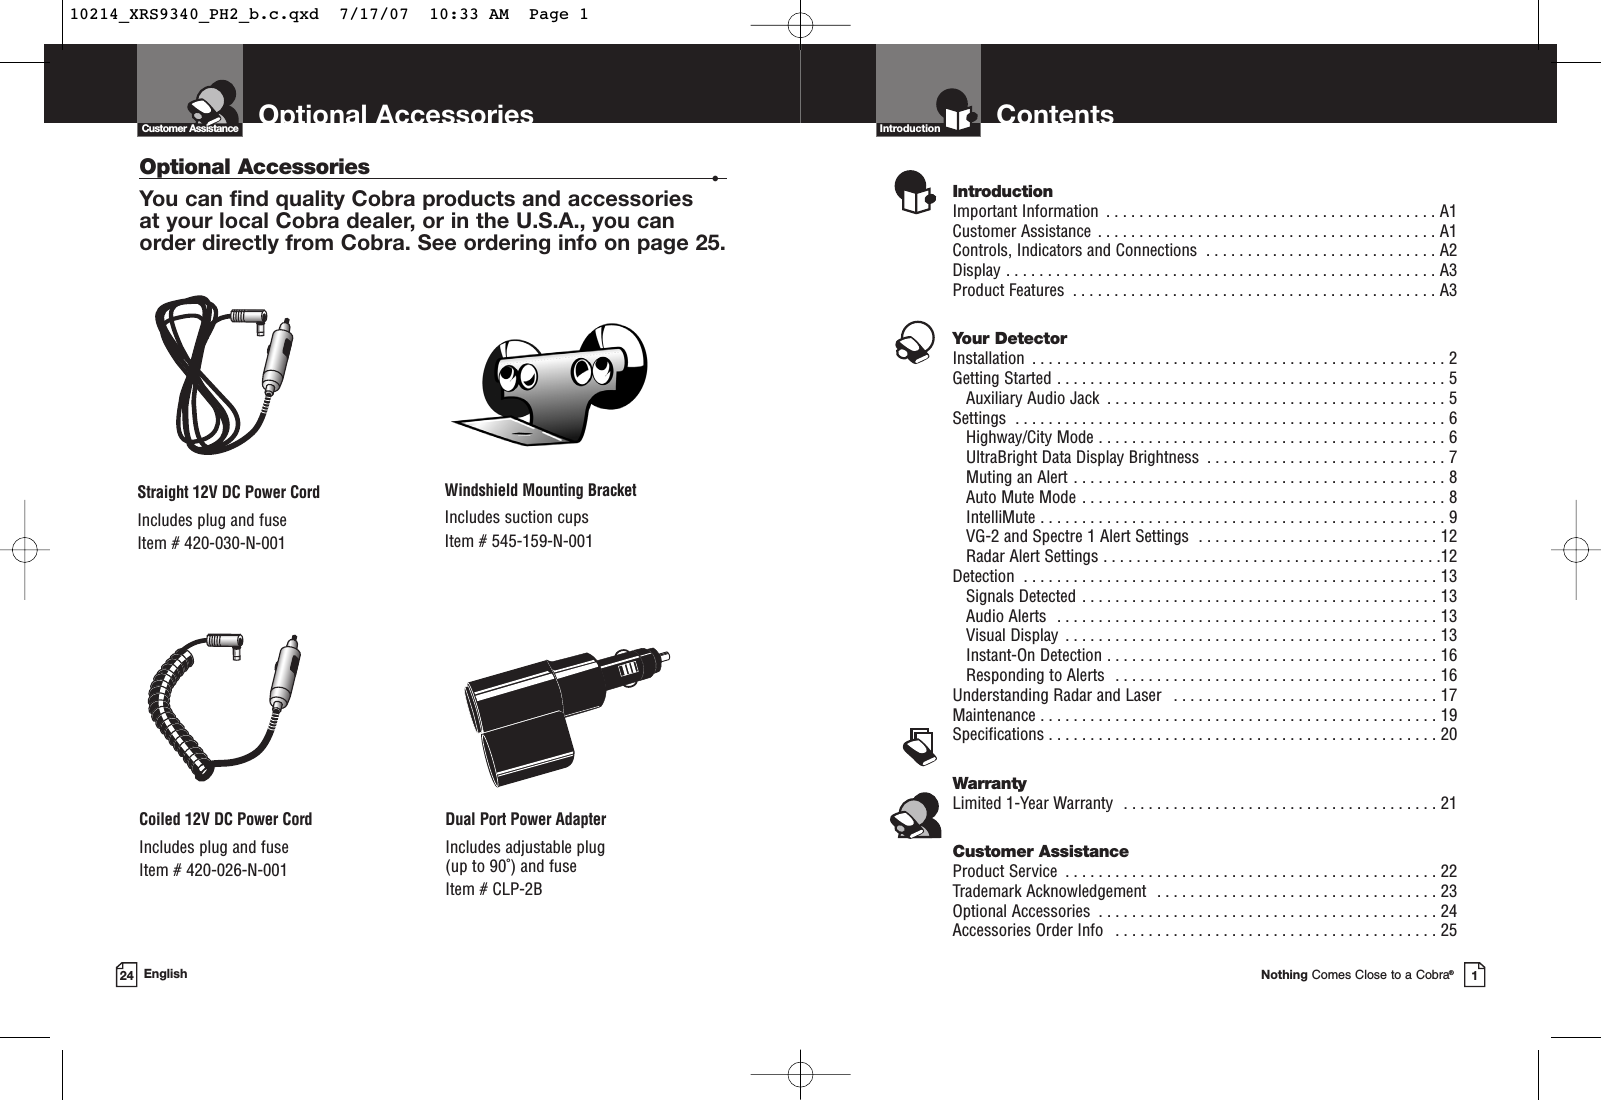 Optional AccessoriesEnglishOptional Accessories •You can find quality Cobra products and accessories at your local Cobra dealer, or in the U.S.A., you can order directly from Cobra. See ordering info on page 25.24Windshield Mounting BracketIncludes suction cupsItem # 545-159-N-001Straight 12V DC Power CordIncludes plug and fuseItem # 420-030-N-001Coiled 12V DC Power CordIncludes plug and fuseItem # 420-026-N-001Dual Port Power AdapterIncludes adjustable plug (up to 90˚) and fuse  Item # CLP-2BCustomer AssistanceNothing Comes Close to a Cobra®1ContentsIntroductionIntroductionImportant Information  . . . . . . . . . . . . . . . . . . . . . . . . . . . . . . . . . . . . . . . . A1Customer Assistance  . . . . . . . . . . . . . . . . . . . . . . . . . . . . . . . . . . . . . . . . . A1Controls, Indicators and Connections  . . . . . . . . . . . . . . . . . . . . . . . . . . . . A2Display . . . . . . . . . . . . . . . . . . . . . . . . . . . . . . . . . . . . . . . . . . . . . . . . . . . . A3Product Features  . . . . . . . . . . . . . . . . . . . . . . . . . . . . . . . . . . . . . . . . . . . . A3Your DetectorInstallation  . . . . . . . . . . . . . . . . . . . . . . . . . . . . . . . . . . . . . . . . . . . . . . . . . . 2Getting Started . . . . . . . . . . . . . . . . . . . . . . . . . . . . . . . . . . . . . . . . . . . . . . . 5Auxiliary Audio Jack  . . . . . . . . . . . . . . . . . . . . . . . . . . . . . . . . . . . . . . . . . 5Settings  . . . . . . . . . . . . . . . . . . . . . . . . . . . . . . . . . . . . . . . . . . . . . . . . . . . . 6Highway/City Mode . . . . . . . . . . . . . . . . . . . . . . . . . . . . . . . . . . . . . . . . . . 6UltraBright Data Display Brightness  . . . . . . . . . . . . . . . . . . . . . . . . . . . . . 7Muting an Alert . . . . . . . . . . . . . . . . . . . . . . . . . . . . . . . . . . . . . . . . . . . . . 8Auto Mute Mode . . . . . . . . . . . . . . . . . . . . . . . . . . . . . . . . . . . . . . . . . . . . 8IntelliMute . . . . . . . . . . . . . . . . . . . . . . . . . . . . . . . . . . . . . . . . . . . . . . . . . 9VG-2 and Spectre 1 Alert Settings  . . . . . . . . . . . . . . . . . . . . . . . . . . . . . 12Radar Alert Settings . . . . . . . . . . . . . . . . . . . . . . . . . . . . . . . . . . . . . . . . .12Detection  . . . . . . . . . . . . . . . . . . . . . . . . . . . . . . . . . . . . . . . . . . . . . . . . . . 13Signals Detected . . . . . . . . . . . . . . . . . . . . . . . . . . . . . . . . . . . . . . . . . . . 13Audio Alerts  . . . . . . . . . . . . . . . . . . . . . . . . . . . . . . . . . . . . . . . . . . . . . . 13Visual Display  . . . . . . . . . . . . . . . . . . . . . . . . . . . . . . . . . . . . . . . . . . . . . 13Instant-On Detection . . . . . . . . . . . . . . . . . . . . . . . . . . . . . . . . . . . . . . . . 16Responding to Alerts  . . . . . . . . . . . . . . . . . . . . . . . . . . . . . . . . . . . . . . . 16Understanding Radar and Laser  . . . . . . . . . . . . . . . . . . . . . . . . . . . . . . . . 17Maintenance . . . . . . . . . . . . . . . . . . . . . . . . . . . . . . . . . . . . . . . . . . . . . . . . 19Specifications . . . . . . . . . . . . . . . . . . . . . . . . . . . . . . . . . . . . . . . . . . . . . . . 20WarrantyLimited 1-Year Warranty  . . . . . . . . . . . . . . . . . . . . . . . . . . . . . . . . . . . . . . 21Customer AssistanceProduct Service  . . . . . . . . . . . . . . . . . . . . . . . . . . . . . . . . . . . . . . . . . . . . . 22Trademark Acknowledgement  . . . . . . . . . . . . . . . . . . . . . . . . . . . . . . . . . . 23Optional Accessories  . . . . . . . . . . . . . . . . . . . . . . . . . . . . . . . . . . . . . . . . . 24Accessories Order Info  . . . . . . . . . . . . . . . . . . . . . . . . . . . . . . . . . . . . . . . 2510214_XRS9340_PH2_b.c.qxd  7/17/07  10:33 AM  Page 1